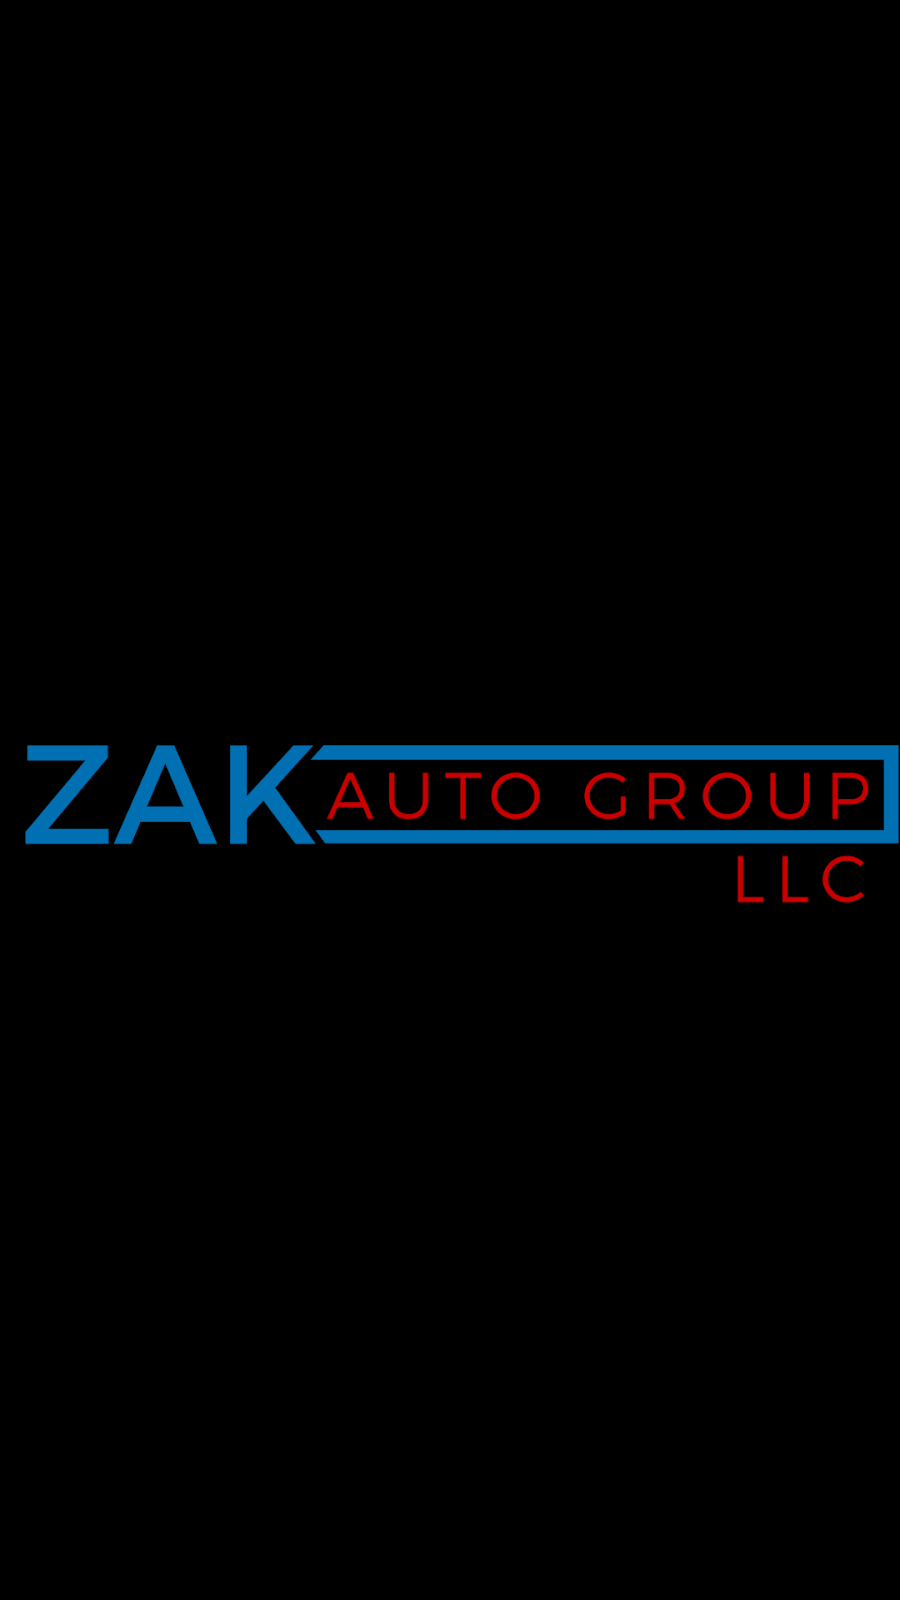 Zak Auto Group llc | 9054 Crawfordsville Rd, Indianapolis, IN 46234 | Phone: (317) 388-5085